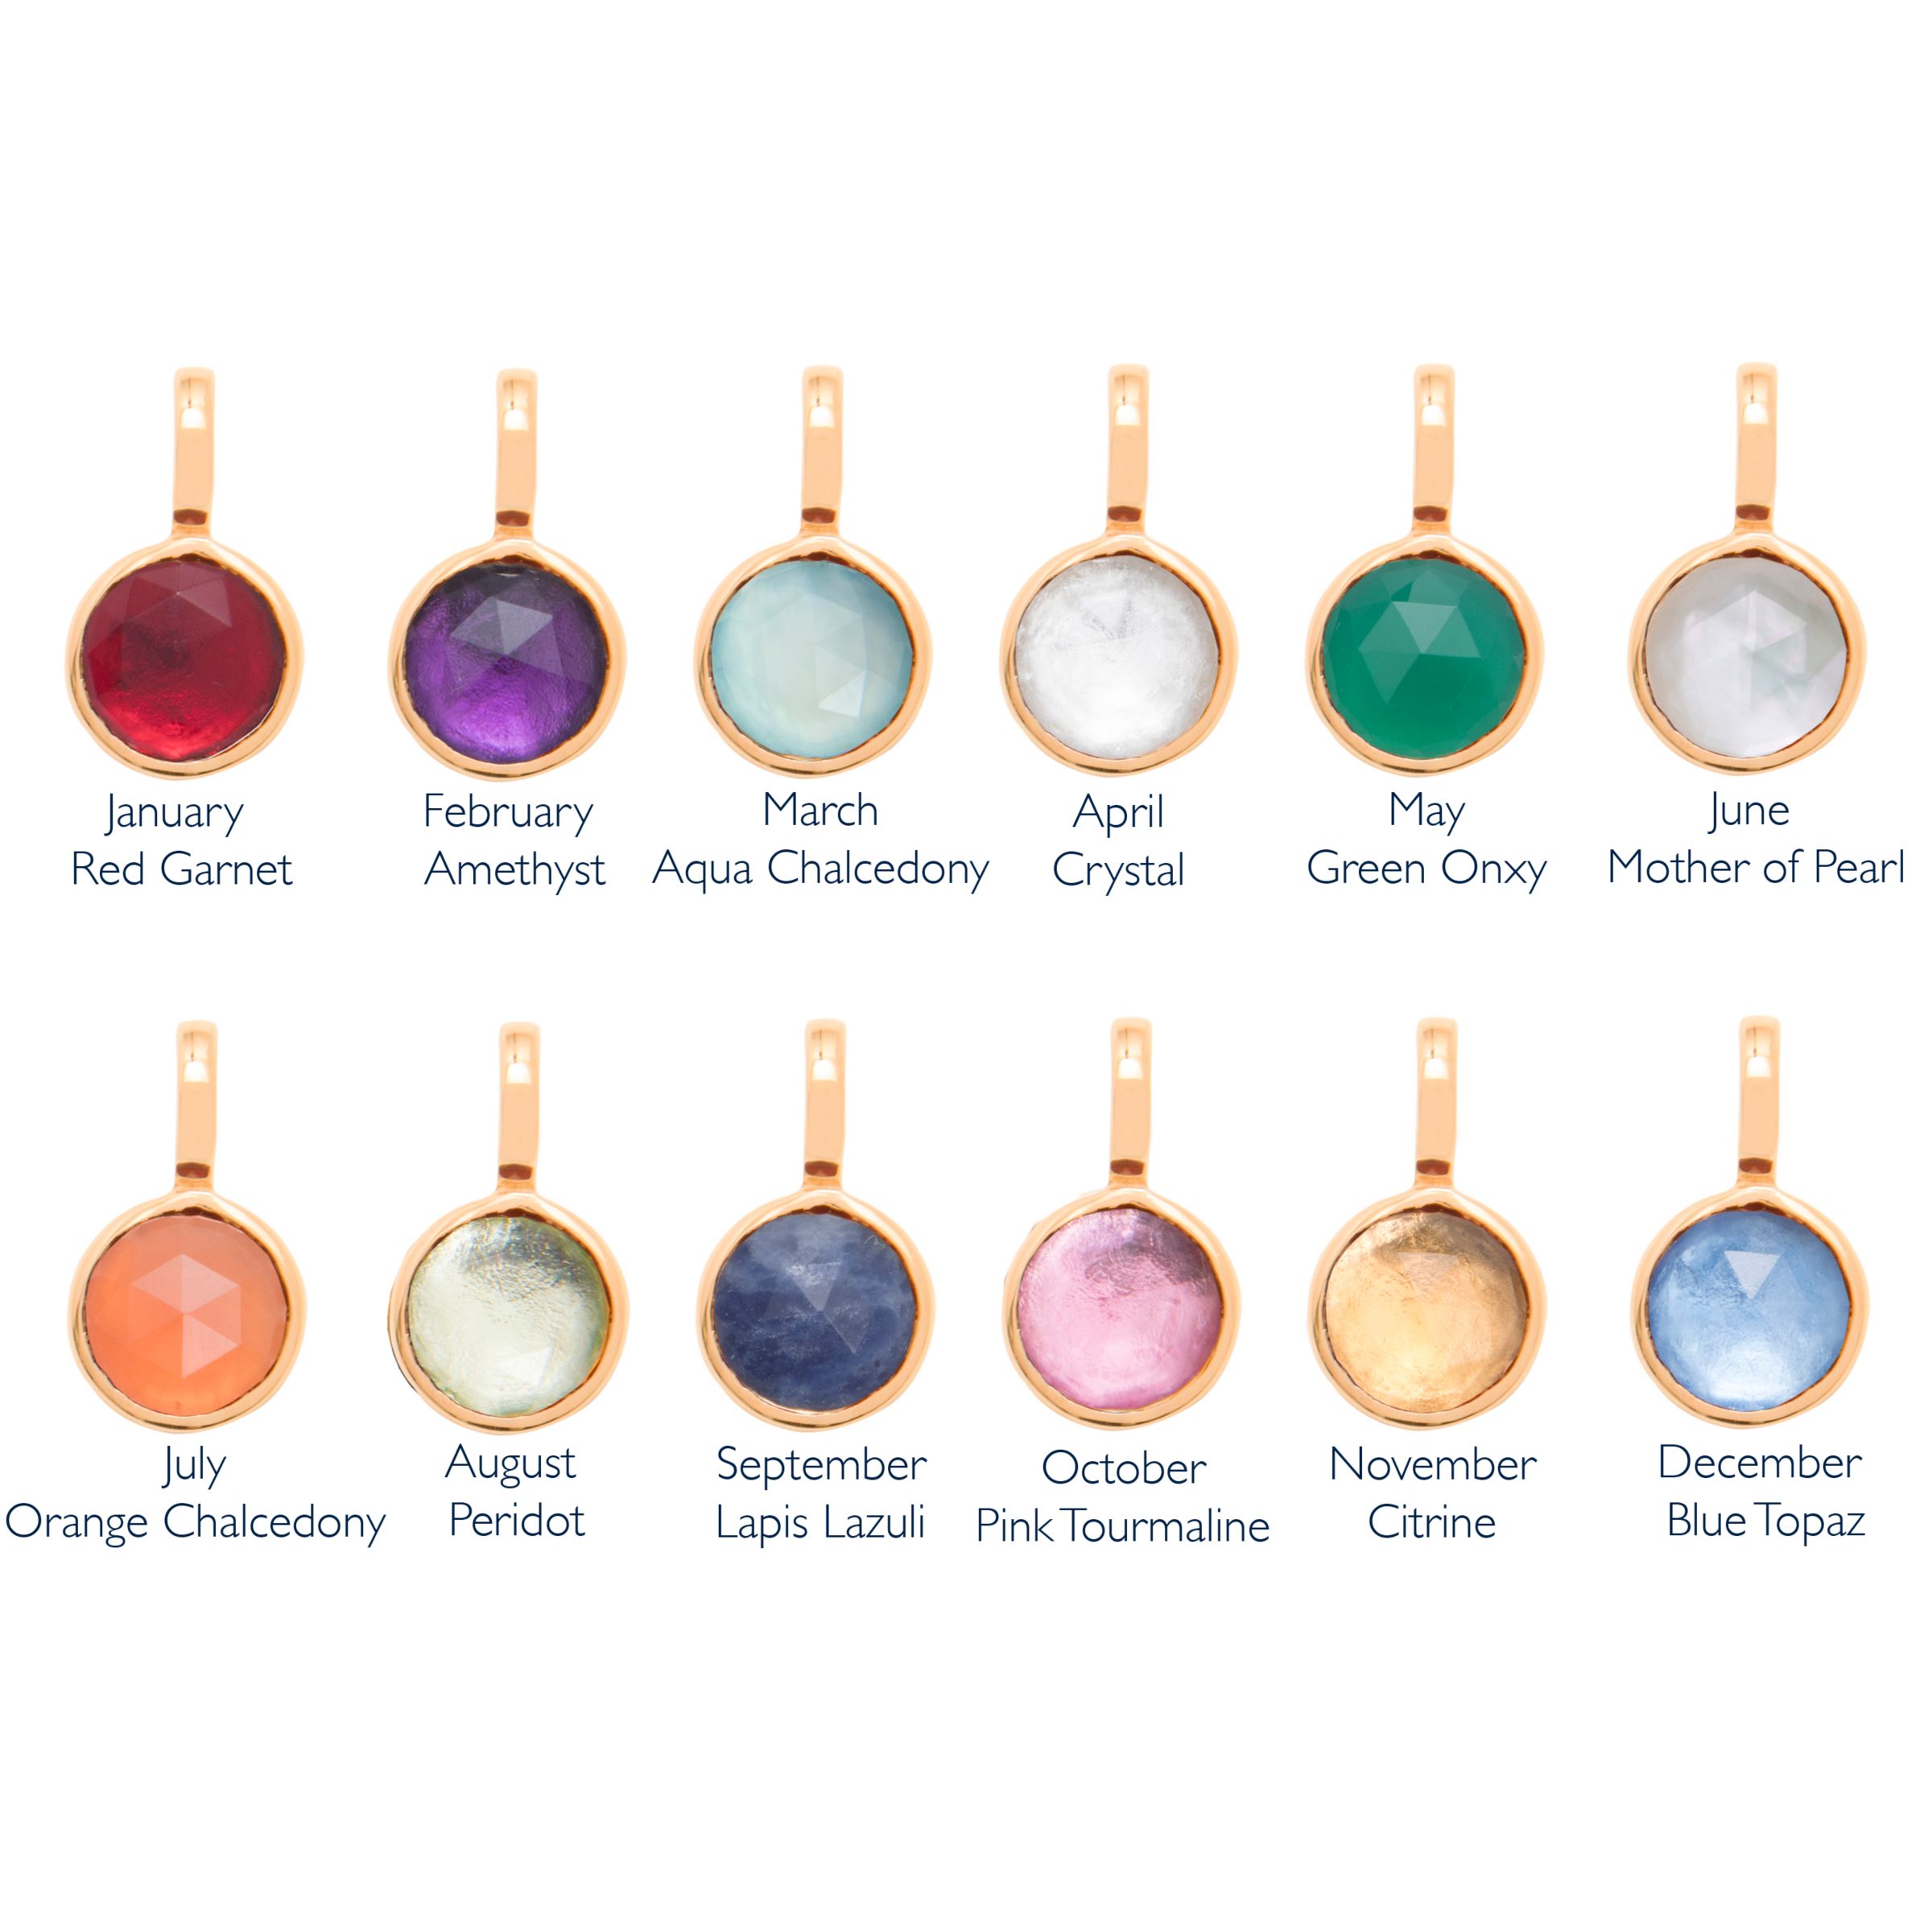 Buy Merci Maman Personalised Disc and Birthstone Pendant Necklace Online at johnlewis.com